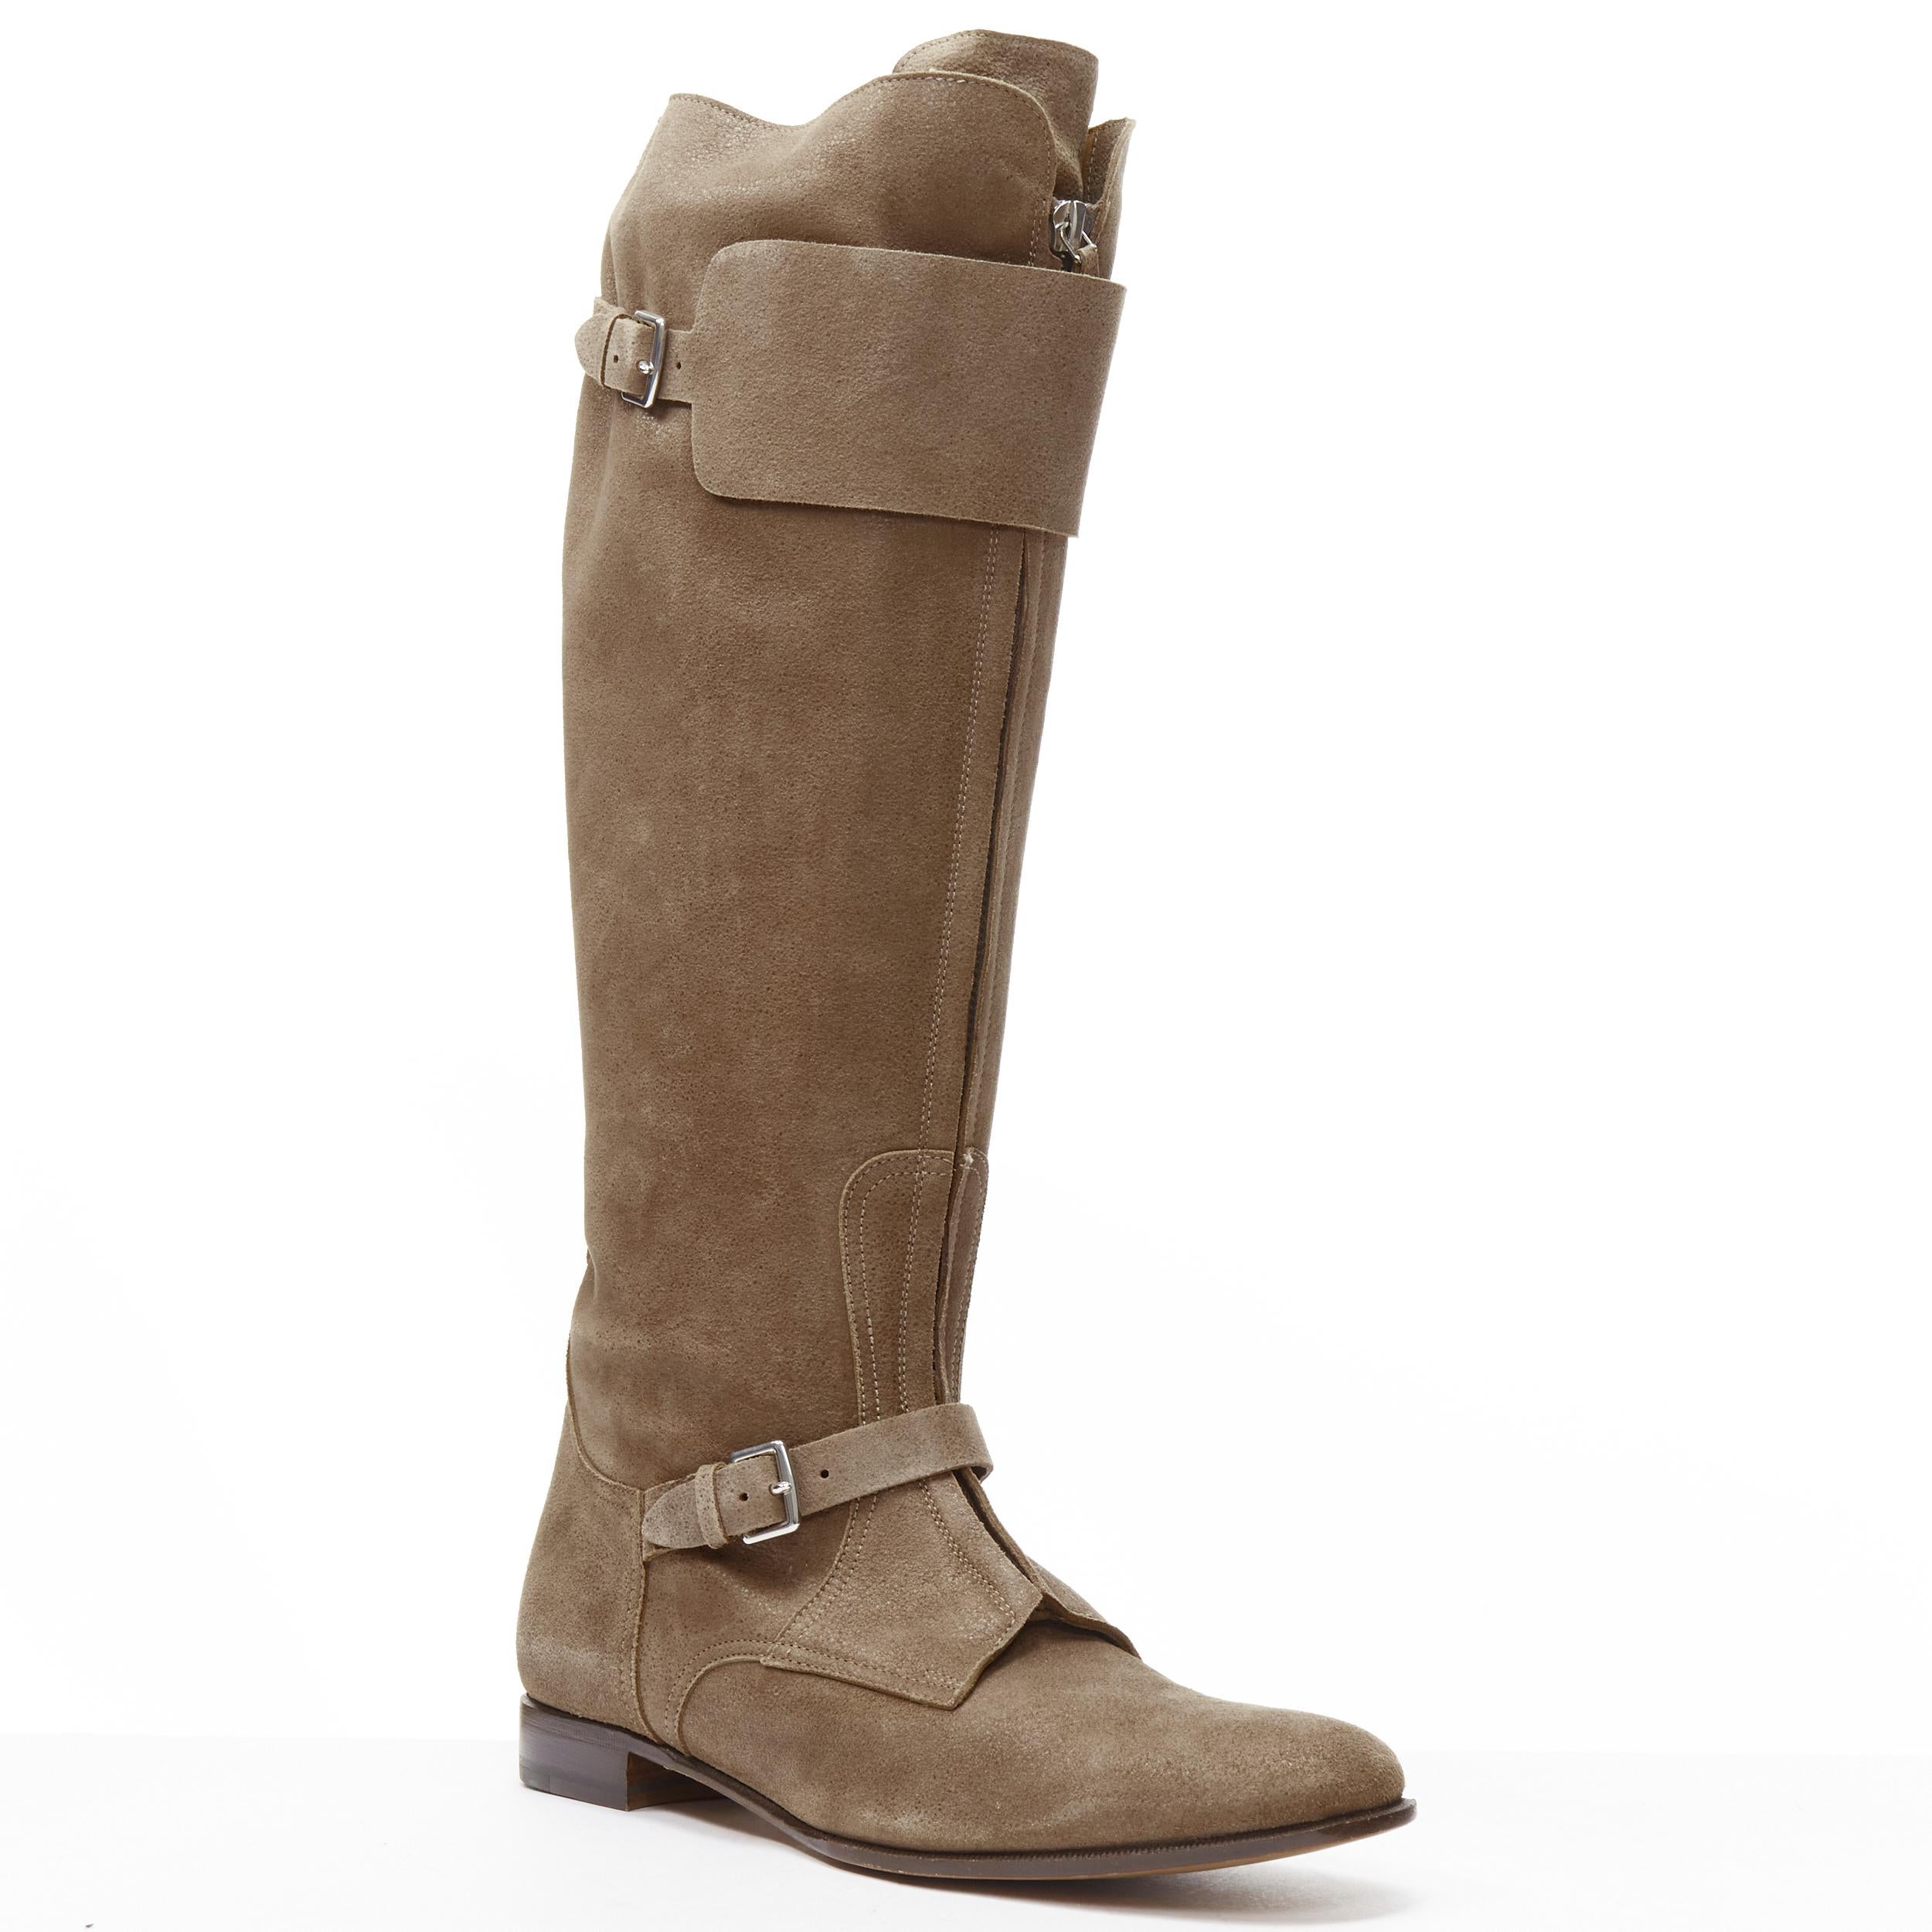 new HERMES brown suede zip front silver buckle flat riding boots EU38.5 o
Reference: MELK/A00230
Brand: Hermes
Material: Suede
Color: Brown
Pattern: Solid
Closure: Zip
Extra Detail: Zip front closure. Silver-tone hardware. Buckle strap detail.